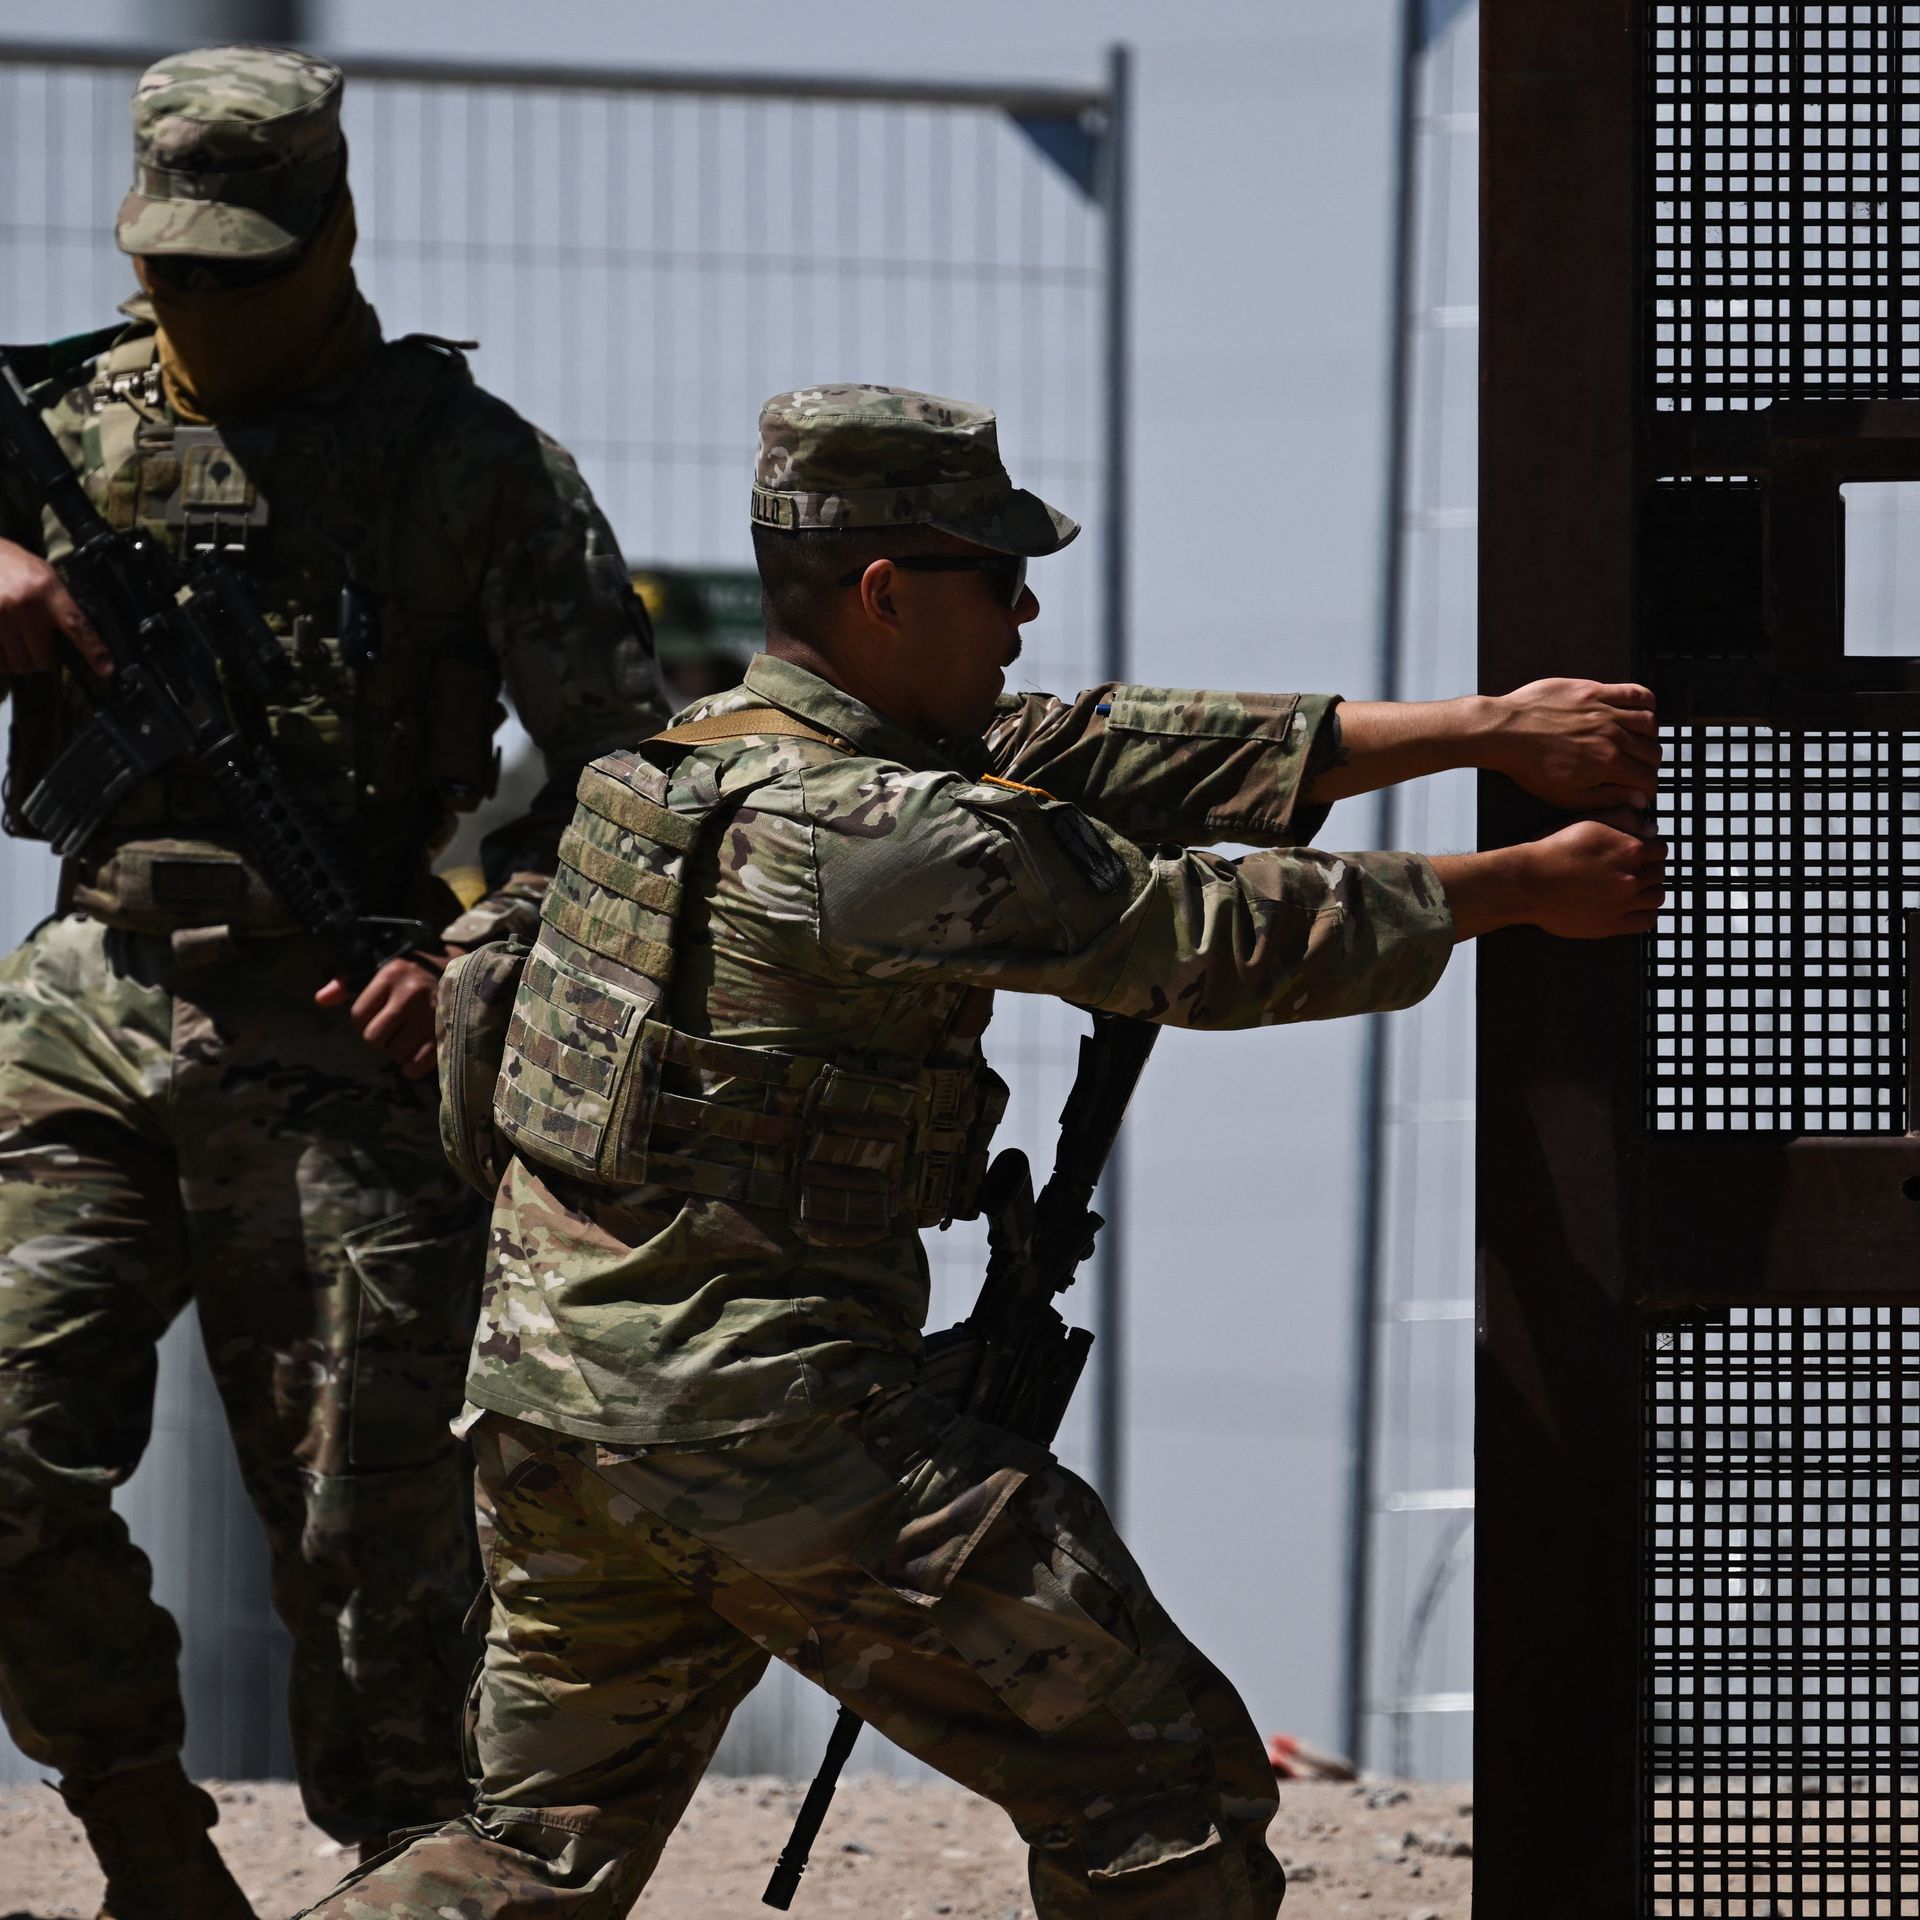 A member of the Texas Army National Guard closes a gate on the border wall as US Customs and Border Protection Border Patrol agents search migrants surrendering themselves for the processing of immigration and asylum claims on the US-Mexico border in El Paso, Texas 